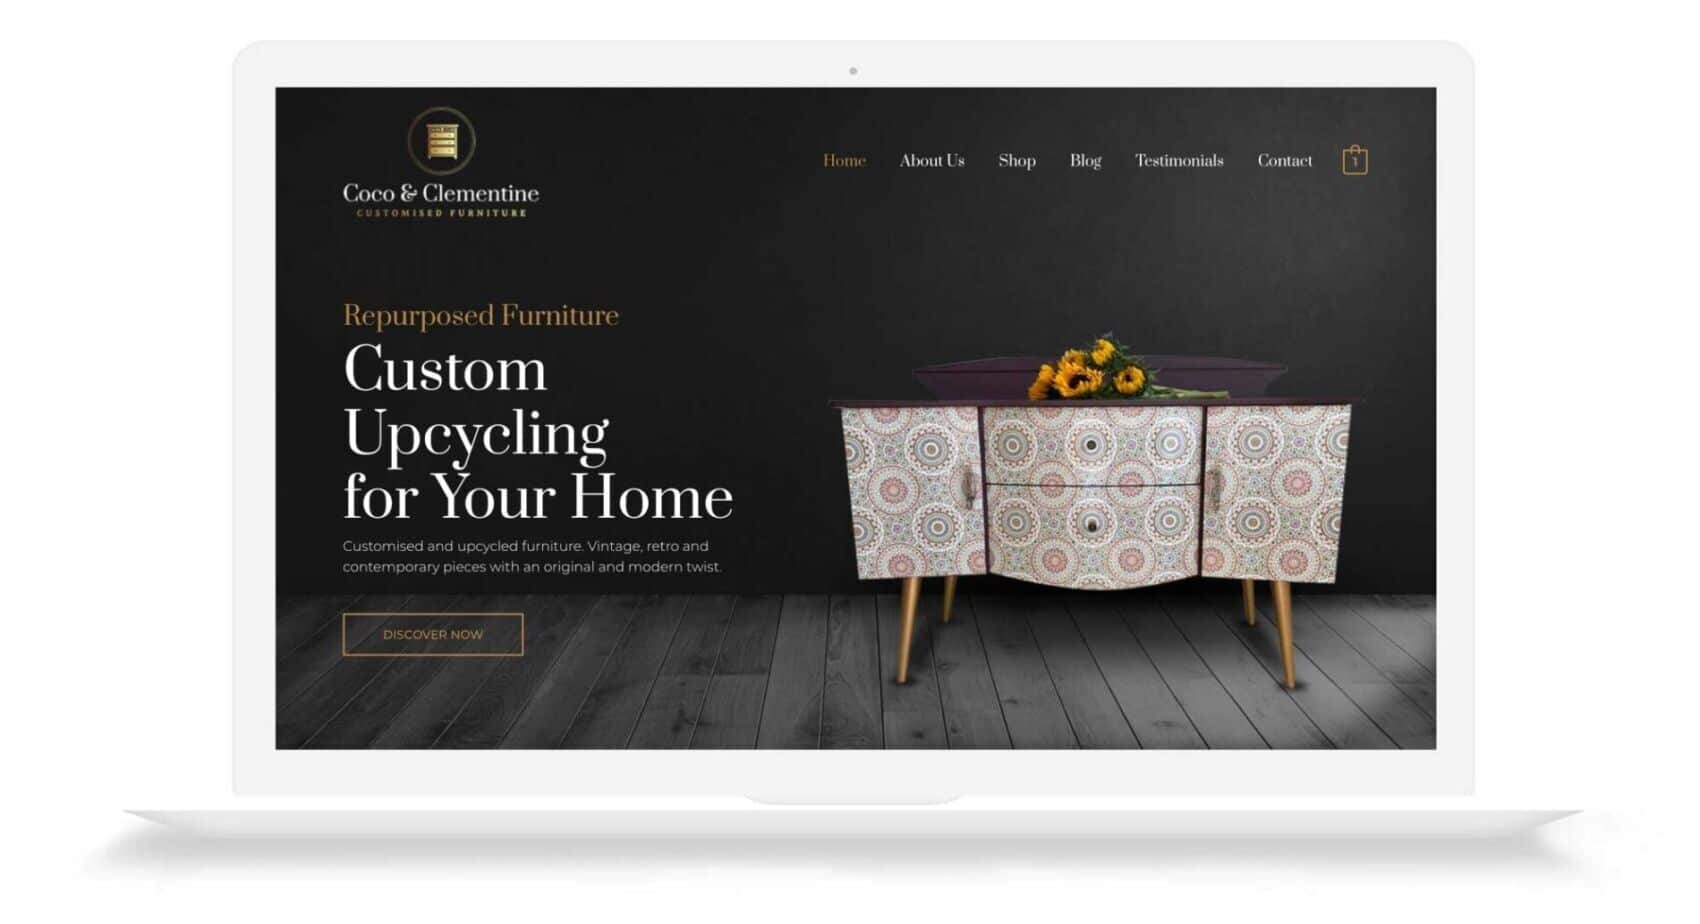 Coco & Clementine Designed from Web Development Company In Cheshire and Hampshire